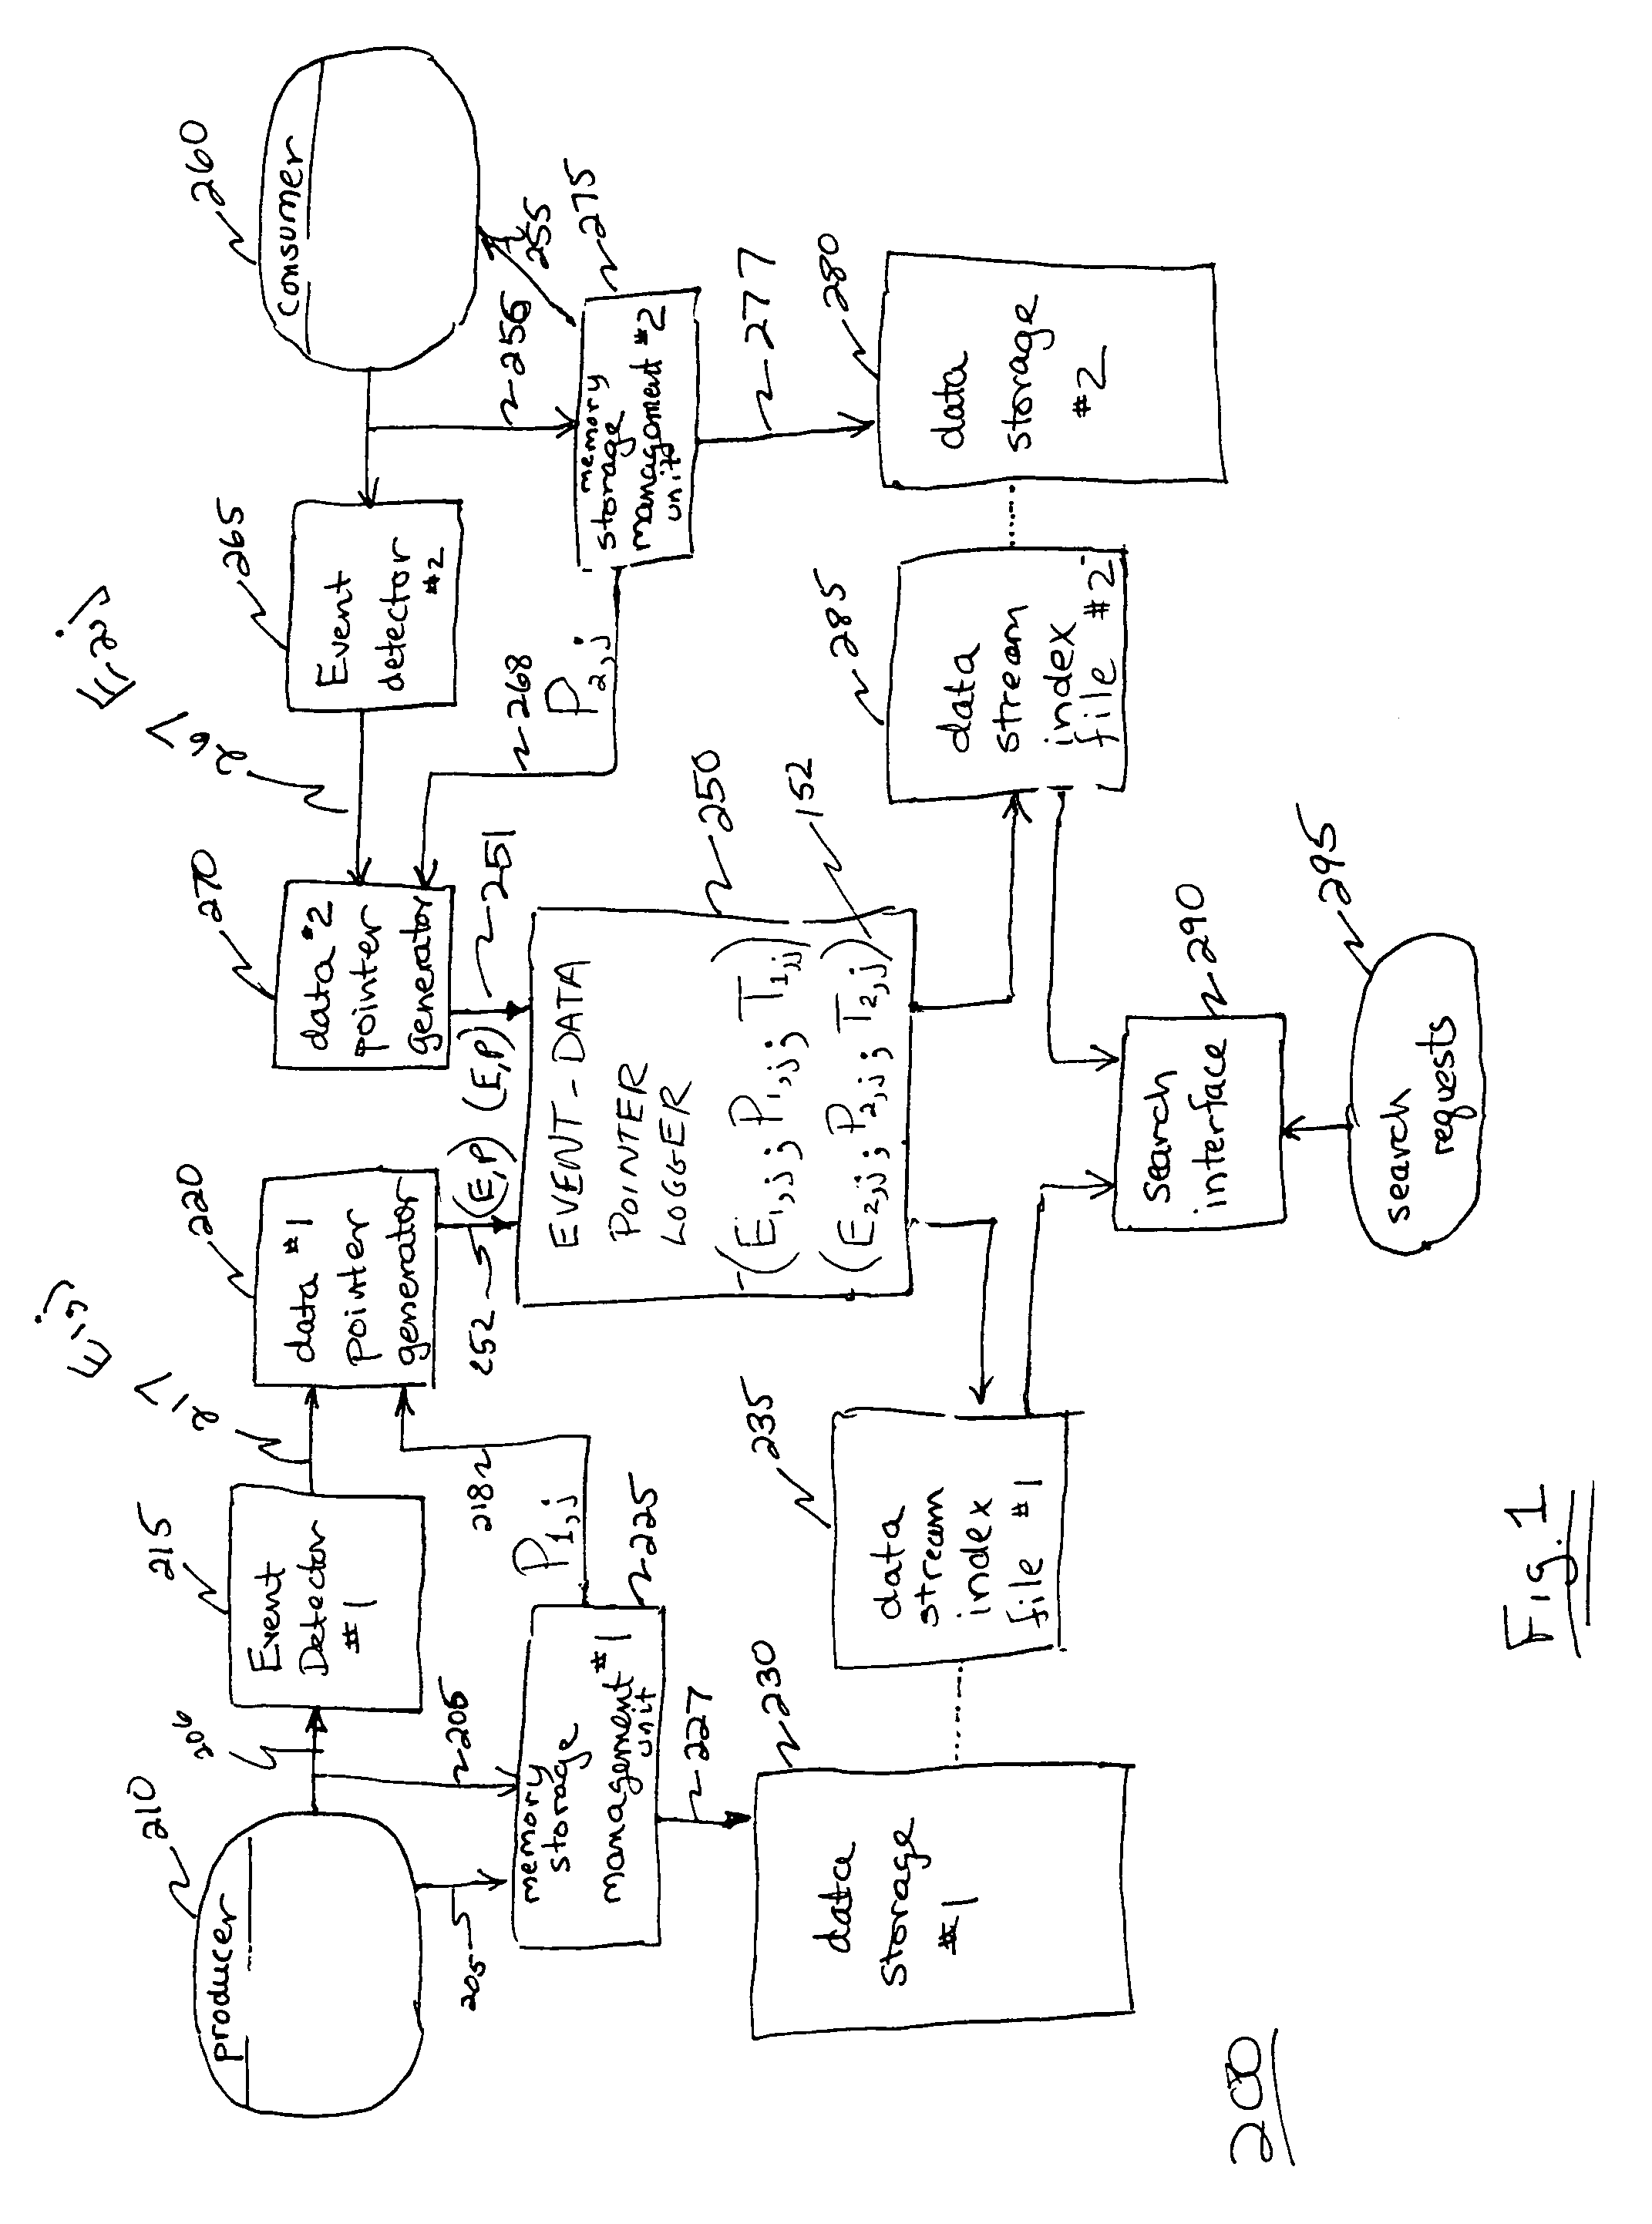 Method and system for correlating data streams